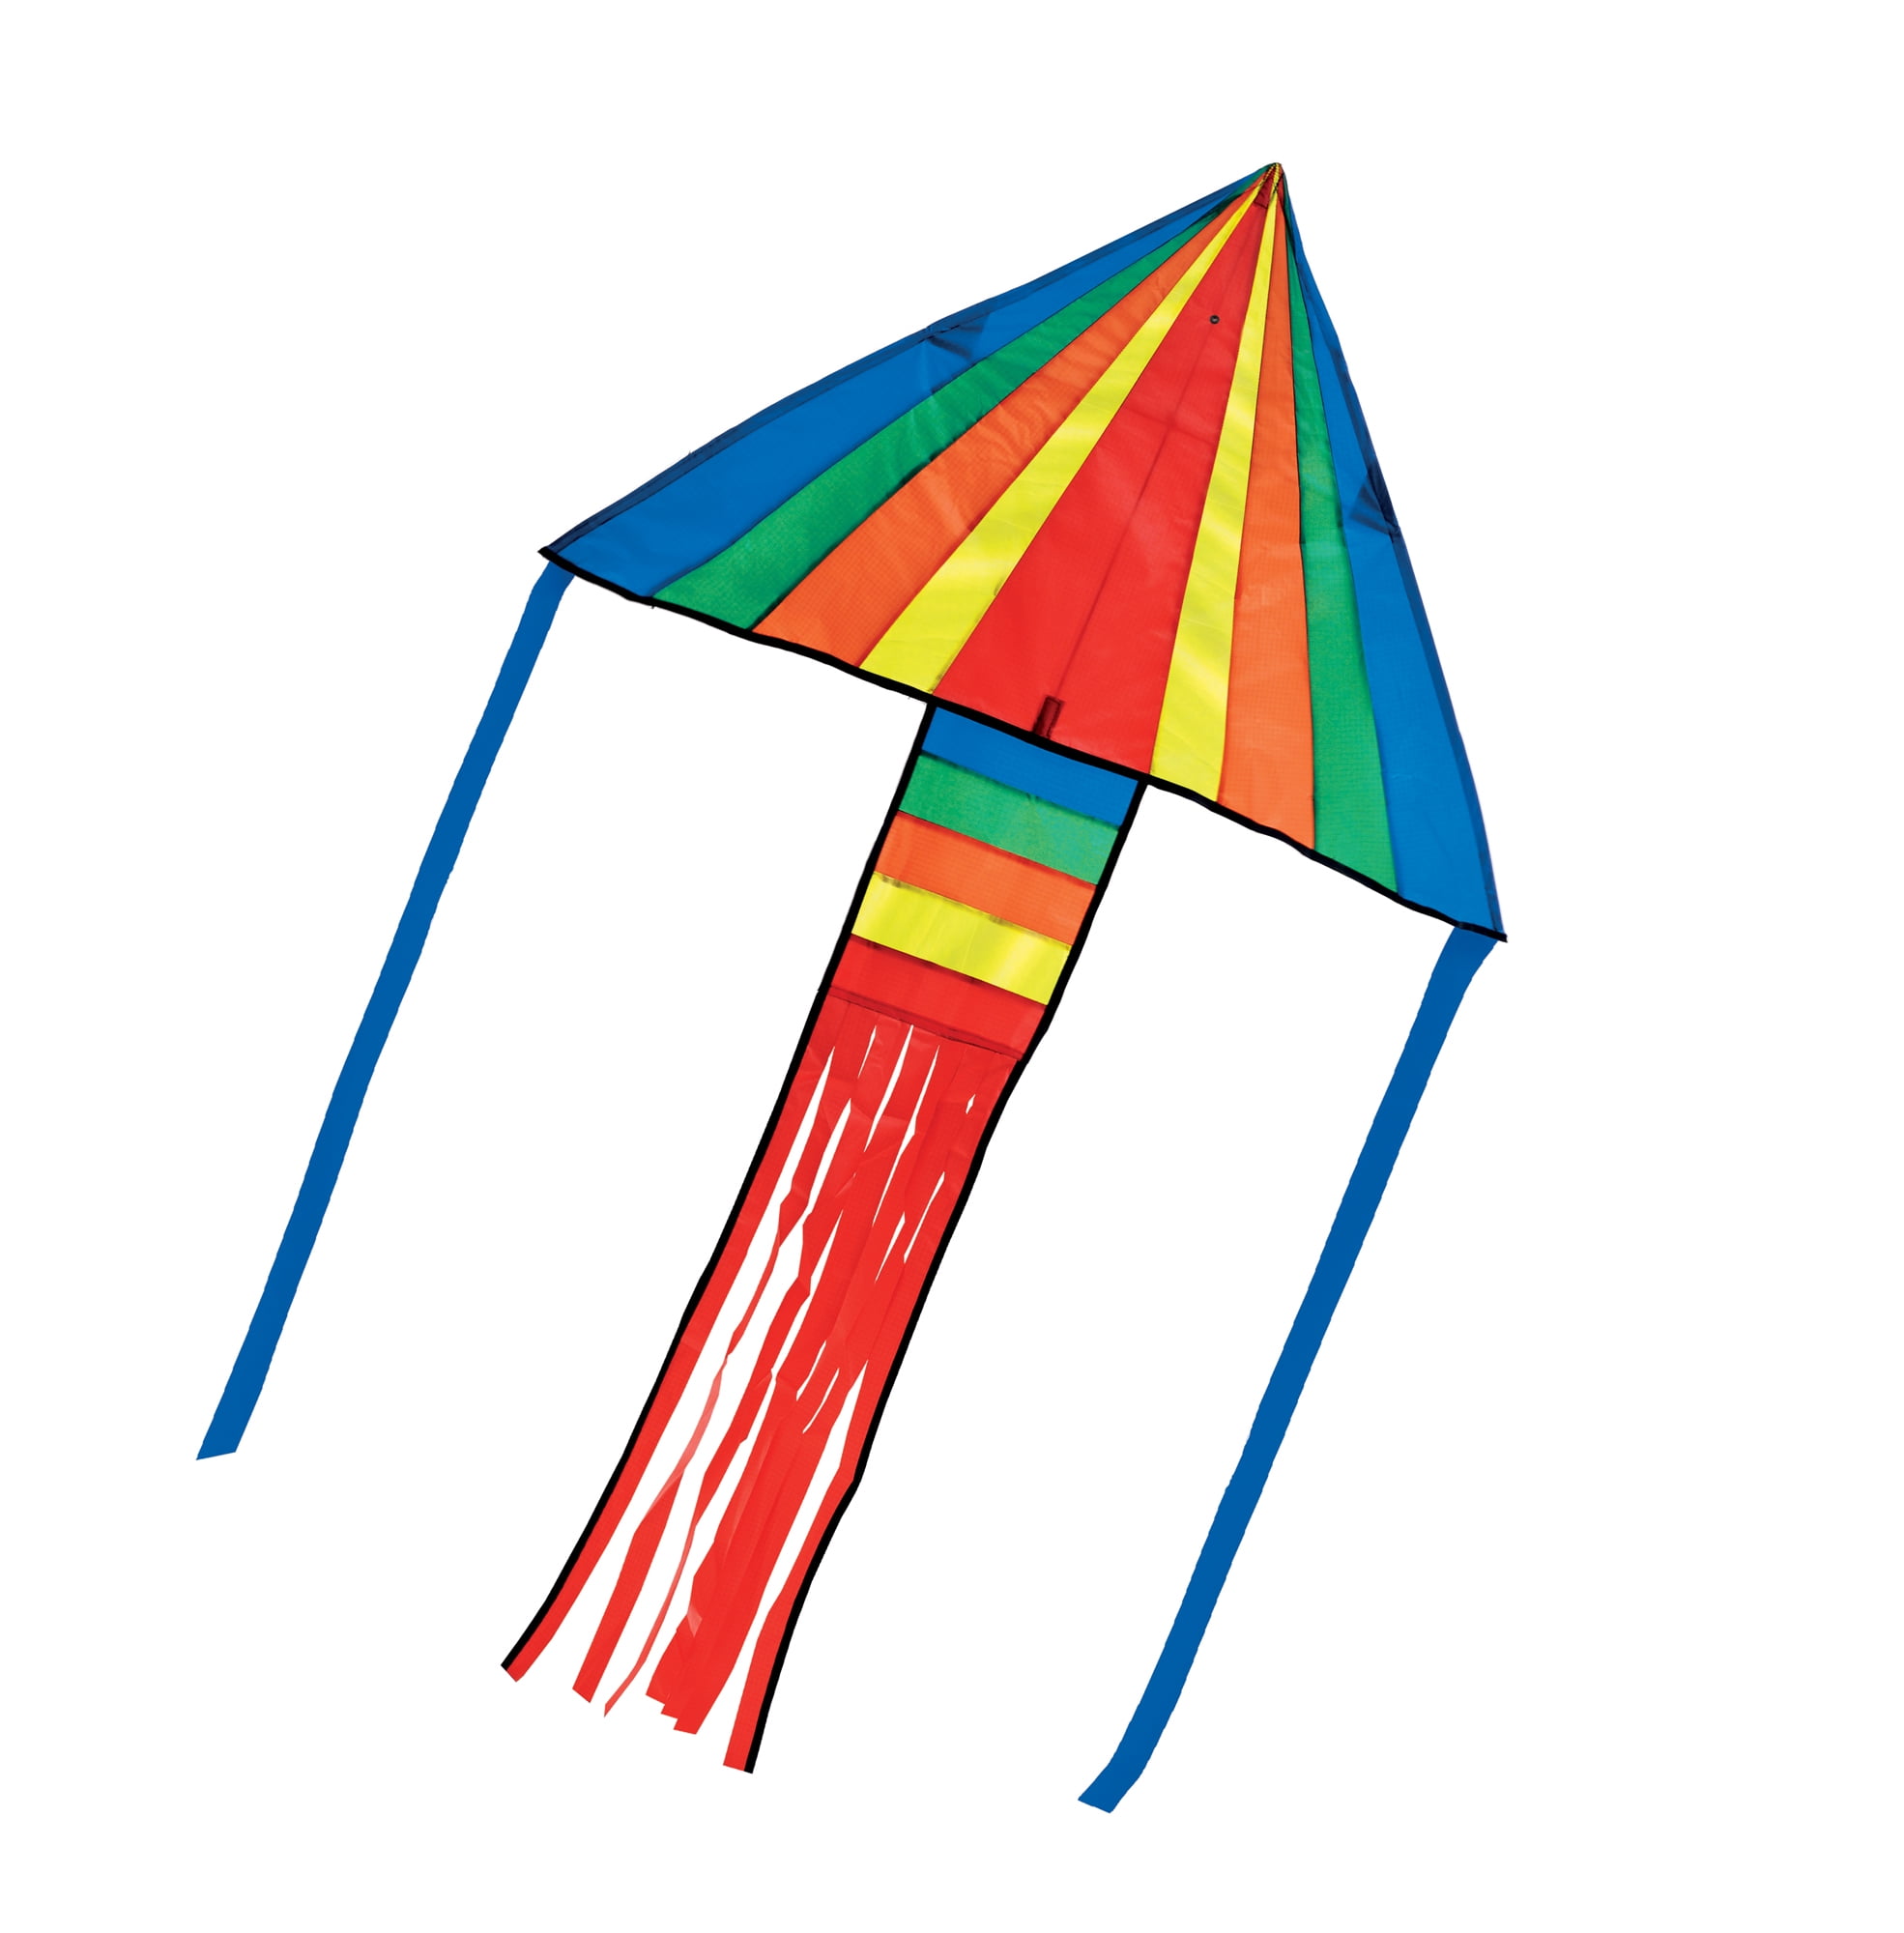 Free Shipping Outdoor Fun Sports Spiral Tail 3D Triangle Kite delta kite box NEW 